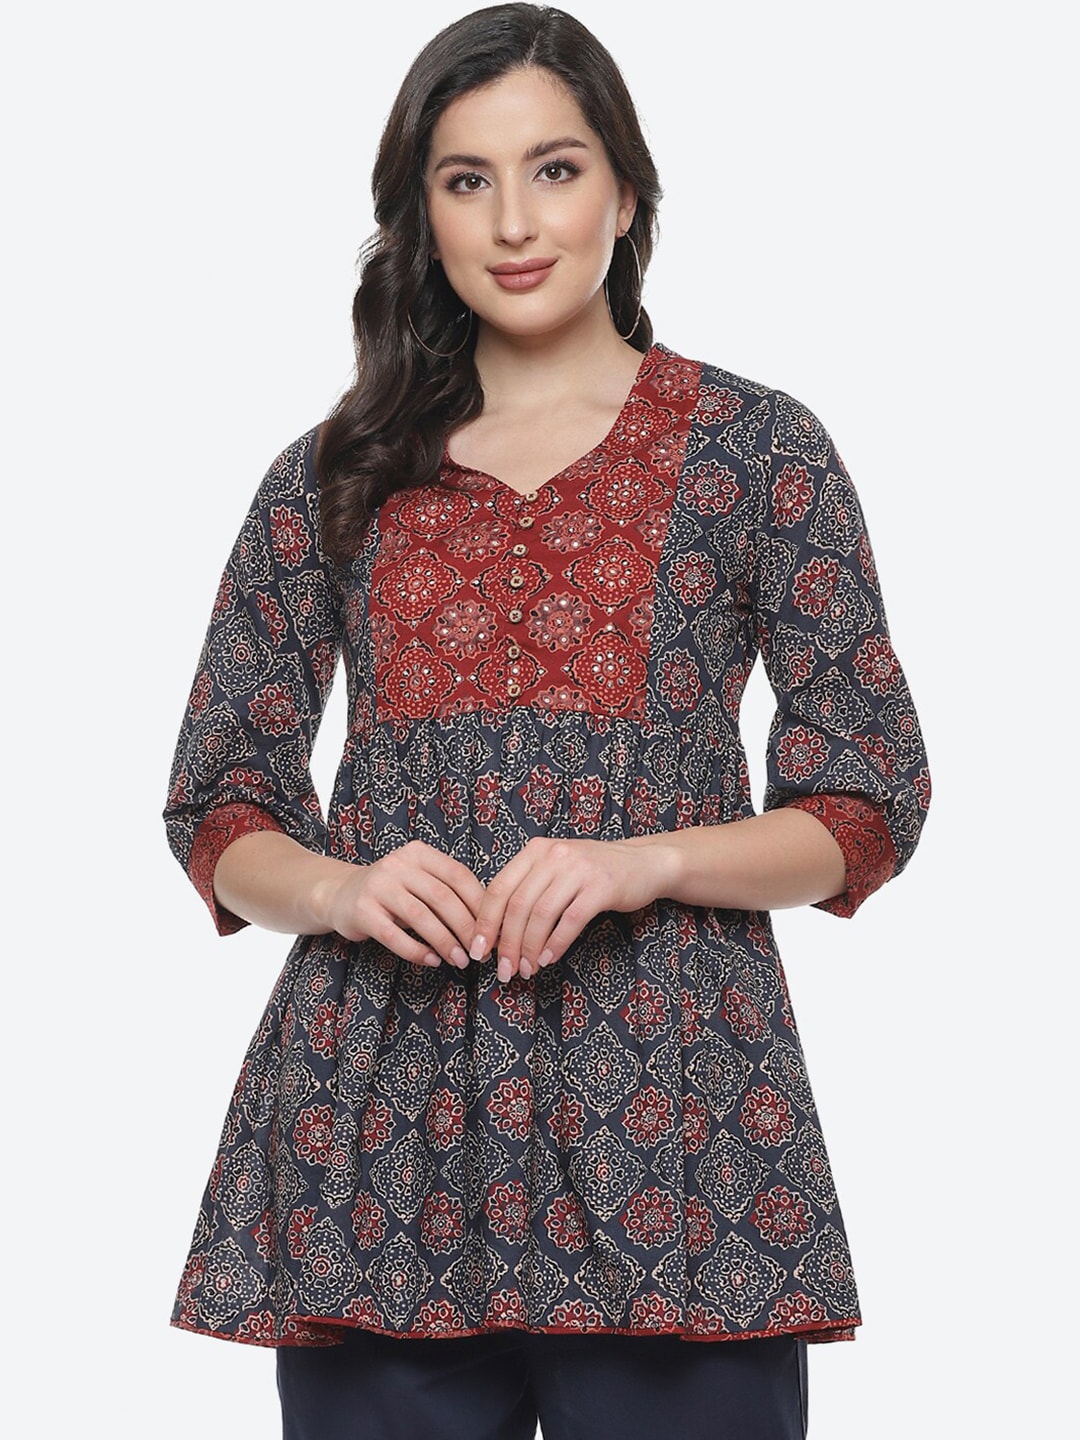 Biba Blue & Red Ethnic Motifs Printed V-Neck Pure Cotton Pleated Kurti Price in India